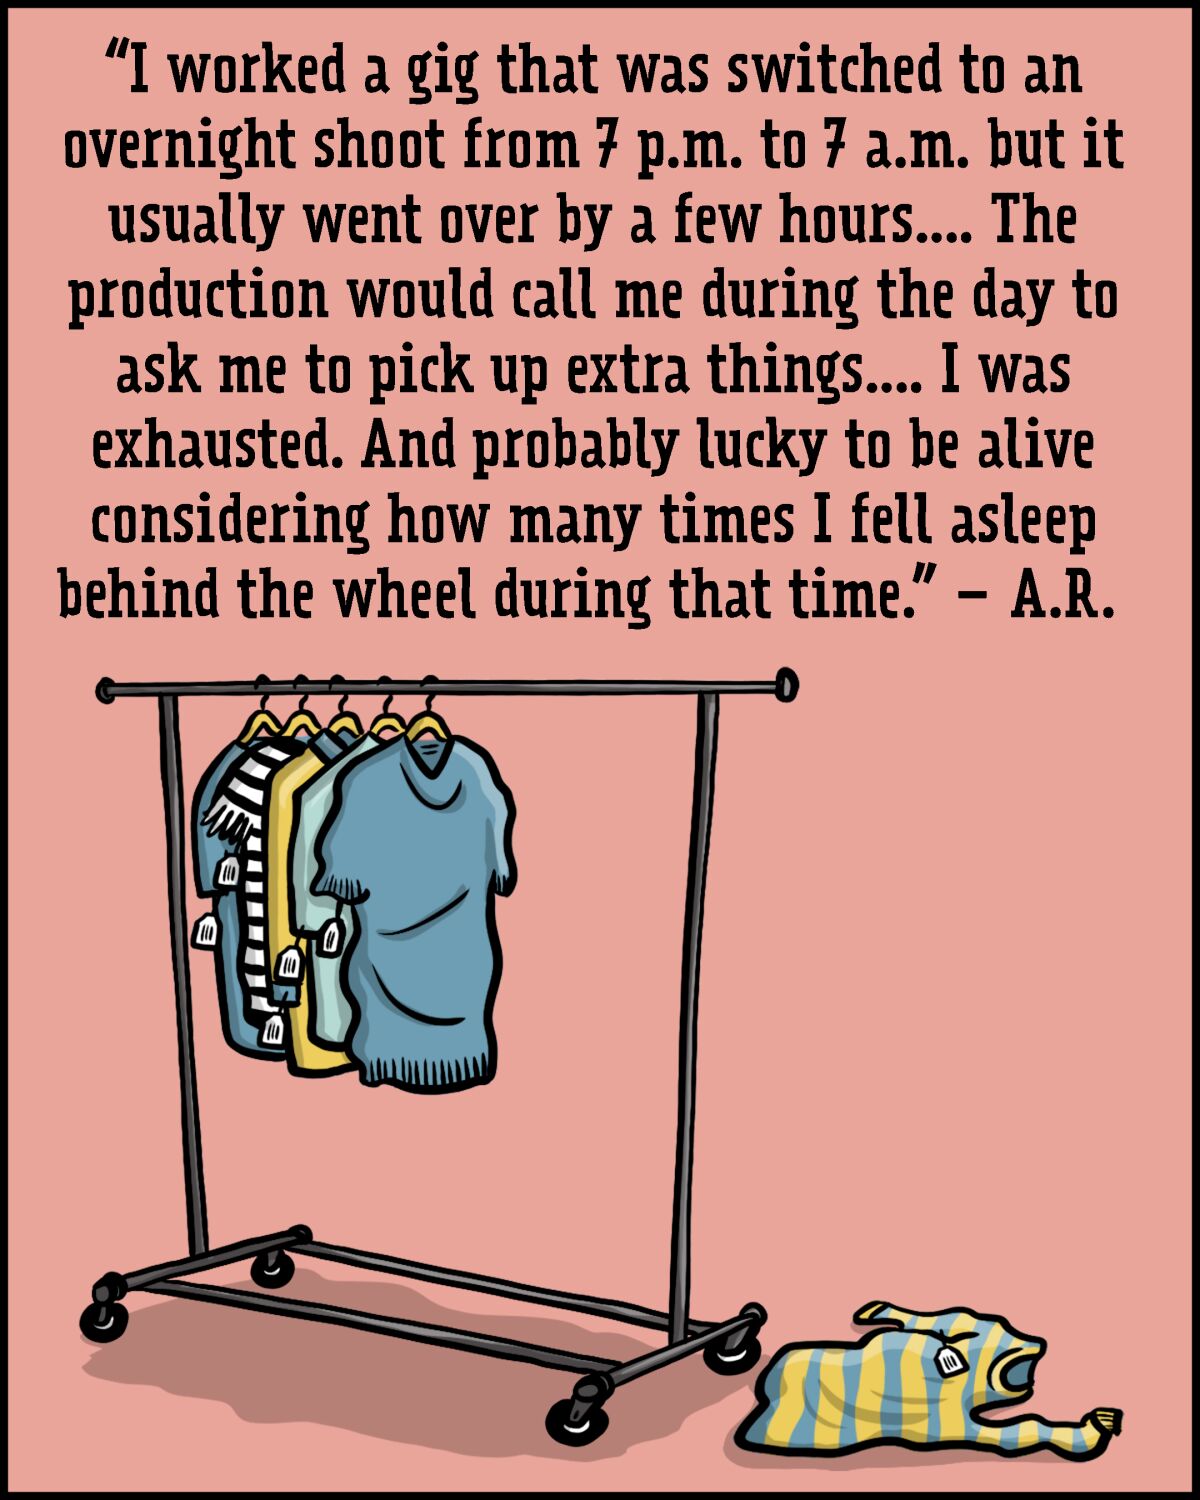 Illustration of a portable clothing rack with sweaters and tops hanging on it and one sweater on the floor.